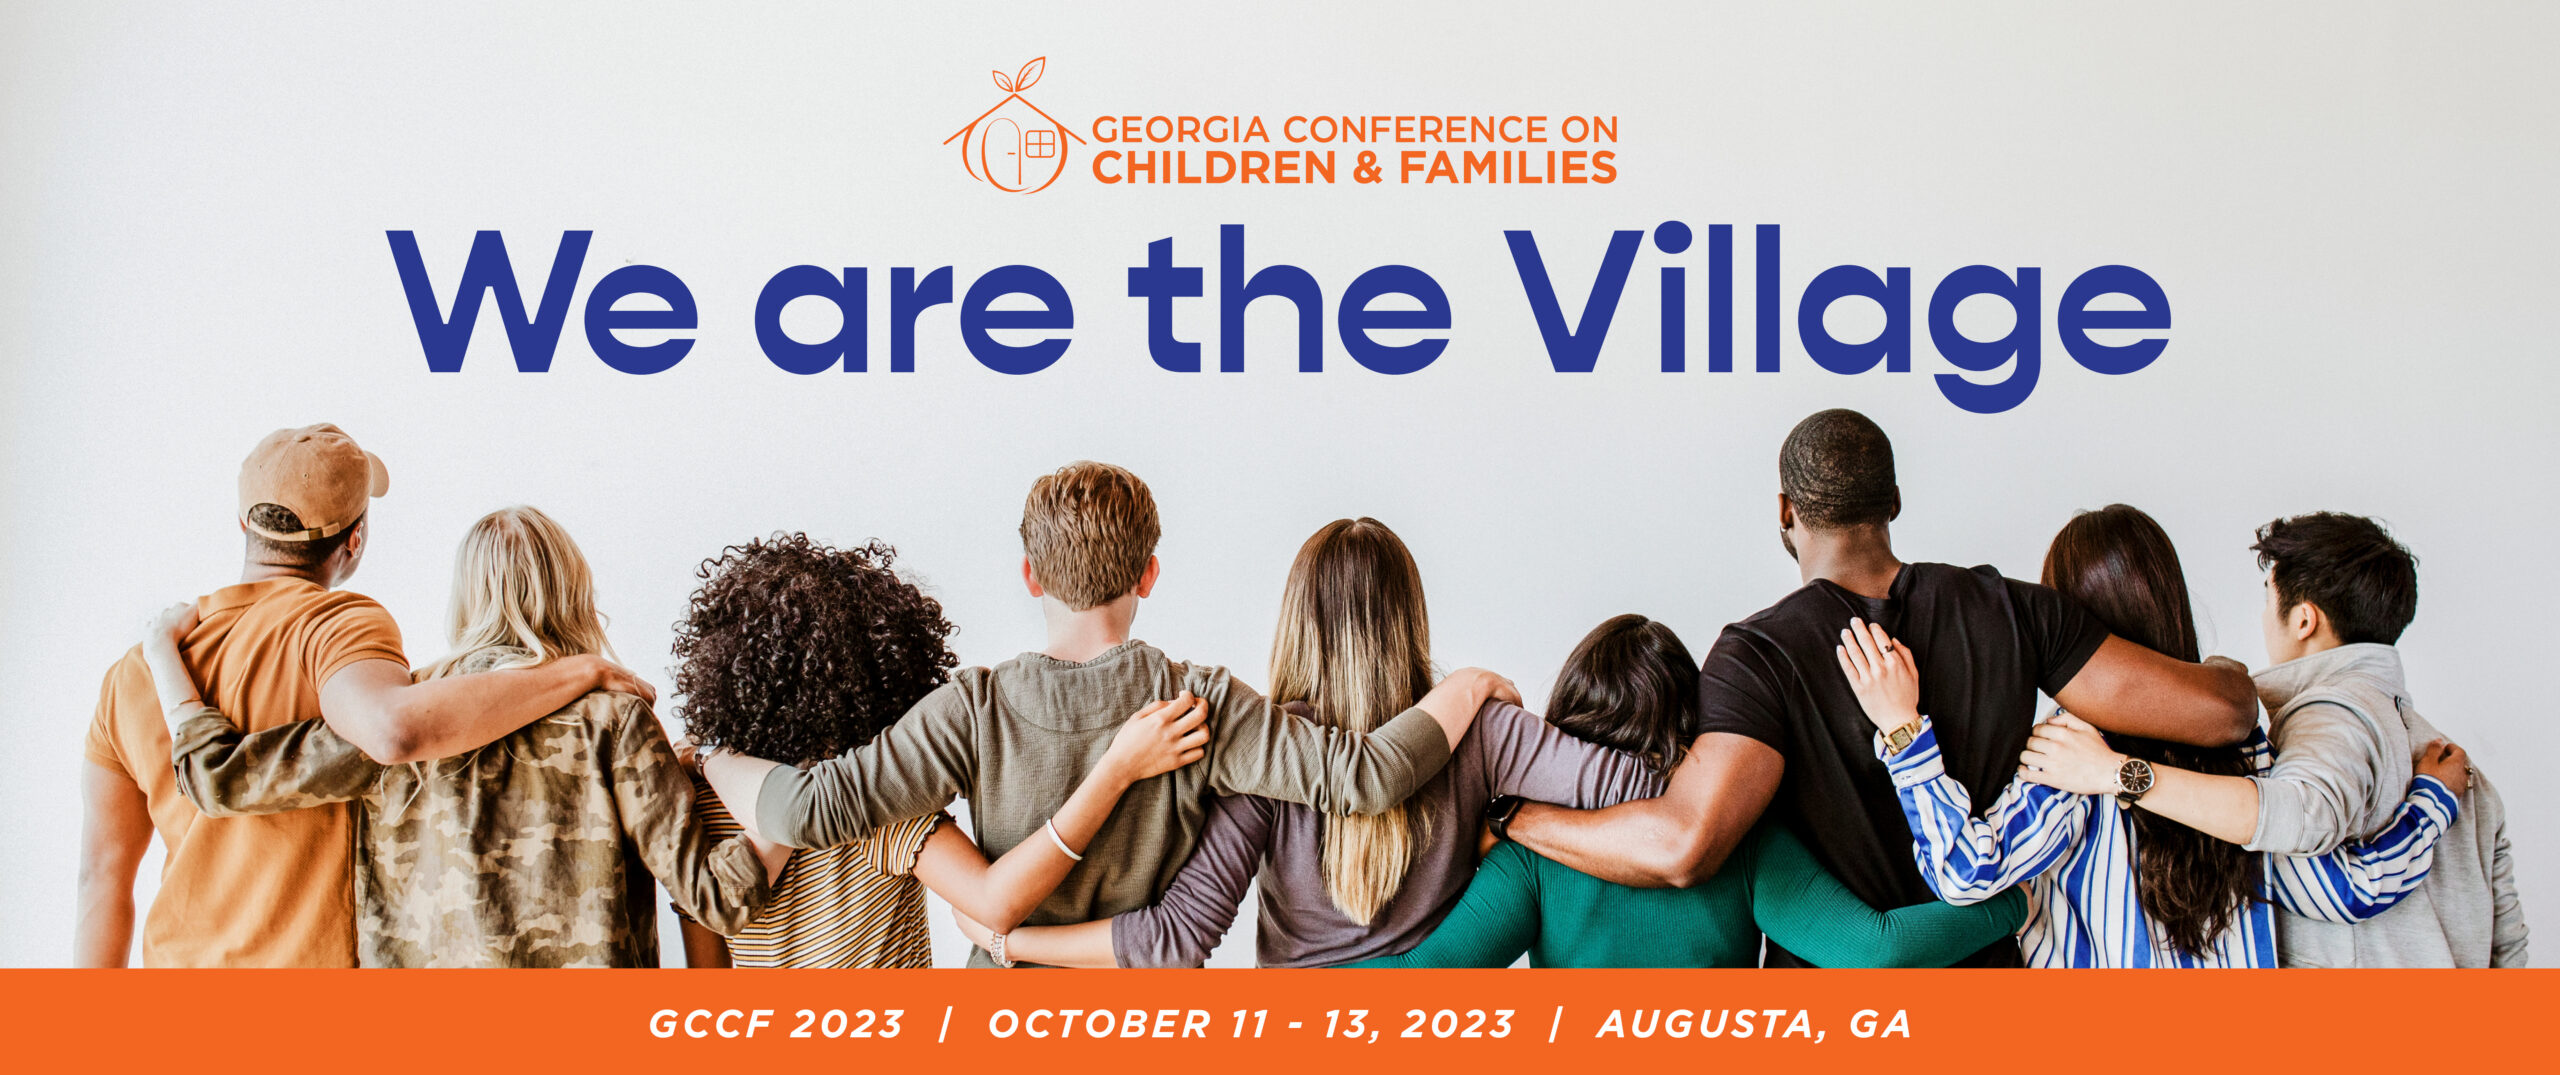 Georgia Conference on Children & Families